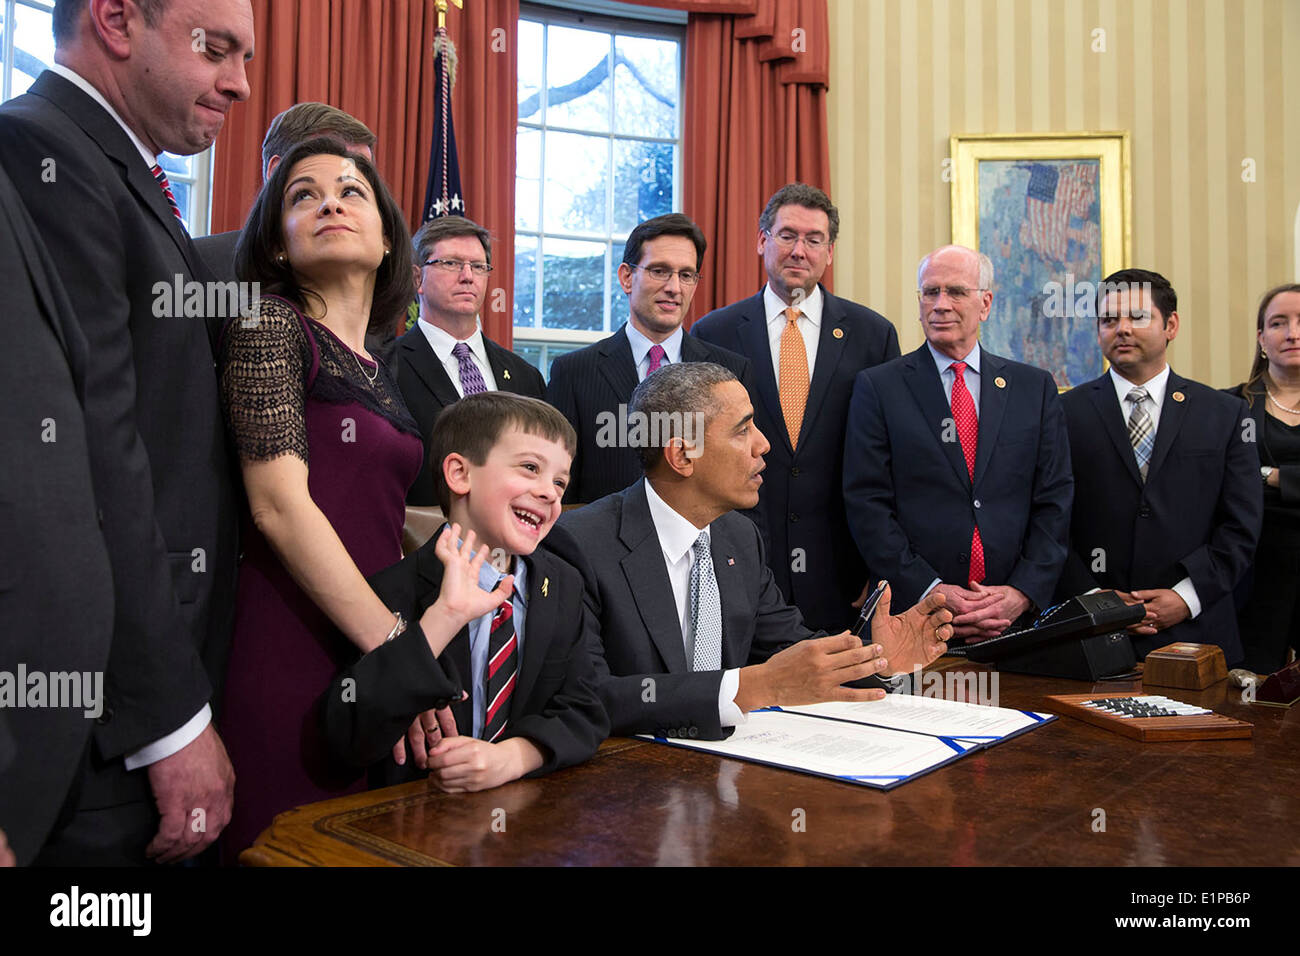 Mark and Ellyn Miller and their son Jacob react as US President Barack Obama prepares to sign H.R. 2019, the Gabriella Miller Kids First Research Act, in the Oval Office of the White House April 3, 2014 in Washington, DC. The law ends taxpayer contributions to the Presidential Election Campaign Fund and diverts the money in that fund to pay for research into pediatric cancer through the National Institutes of Health. Stock Photo